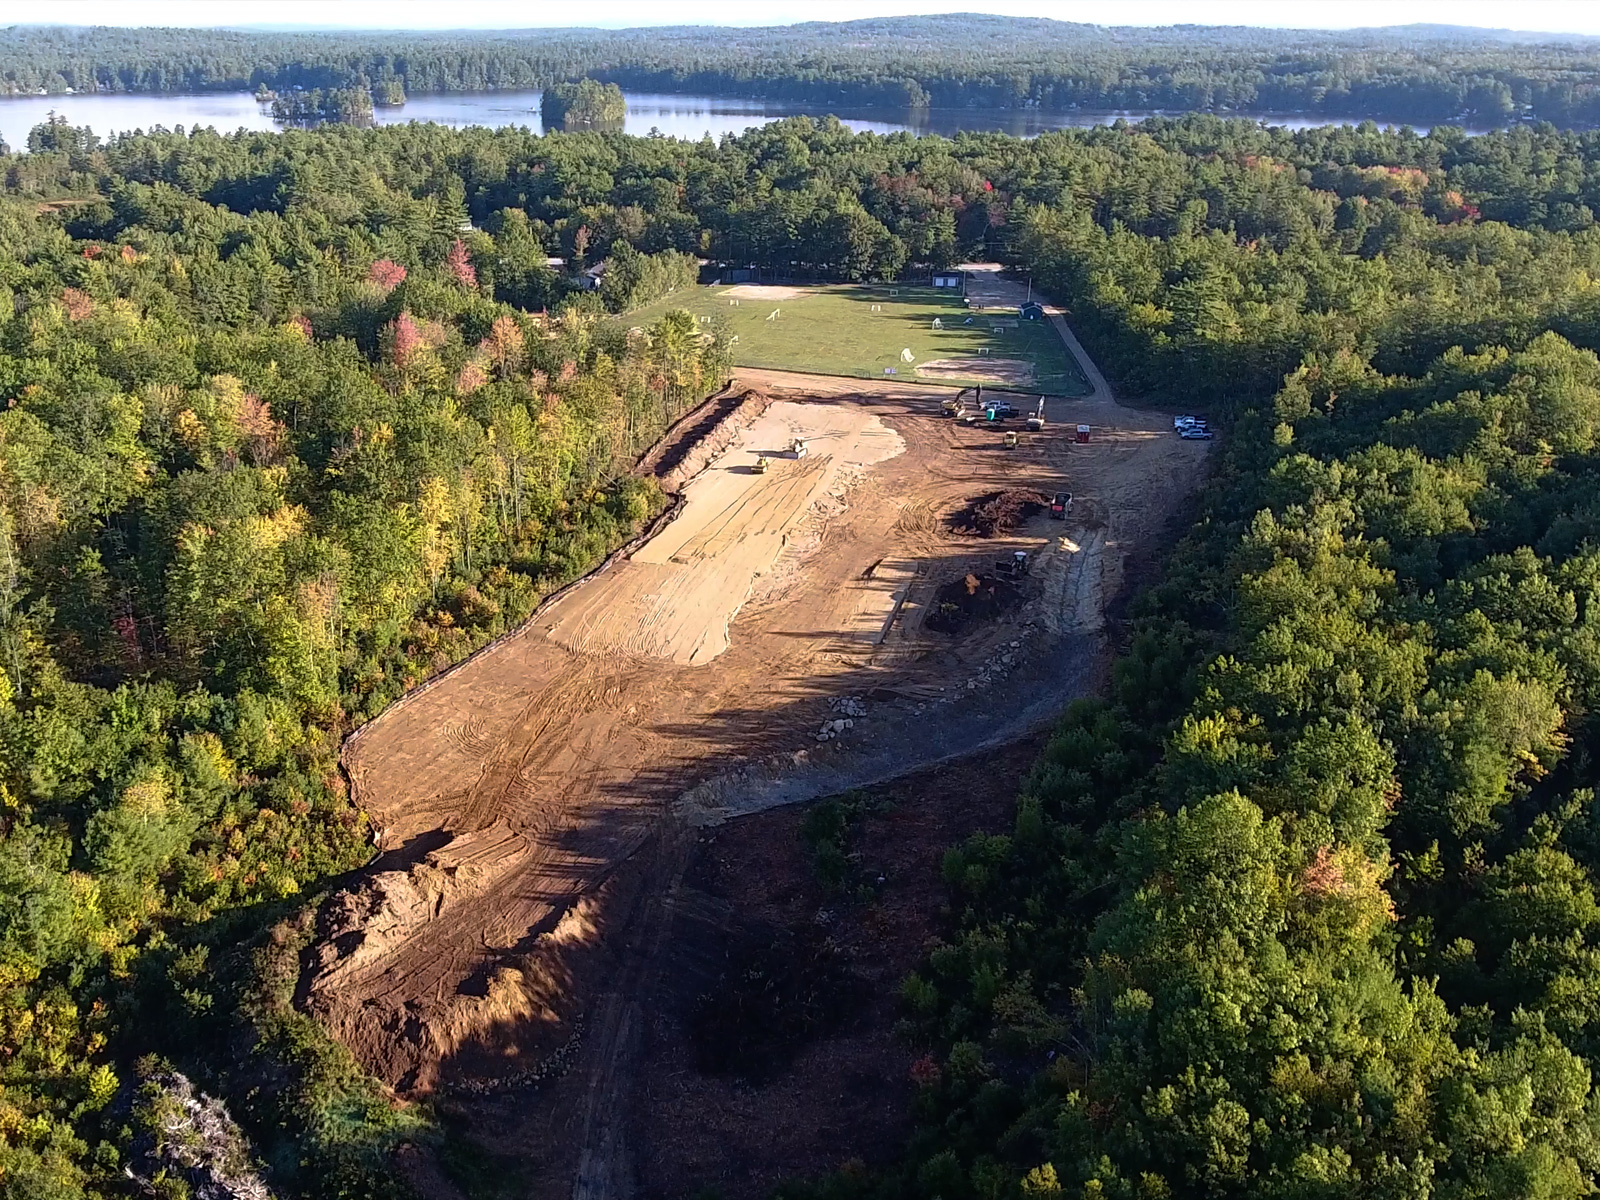 Memorial Field Expansion